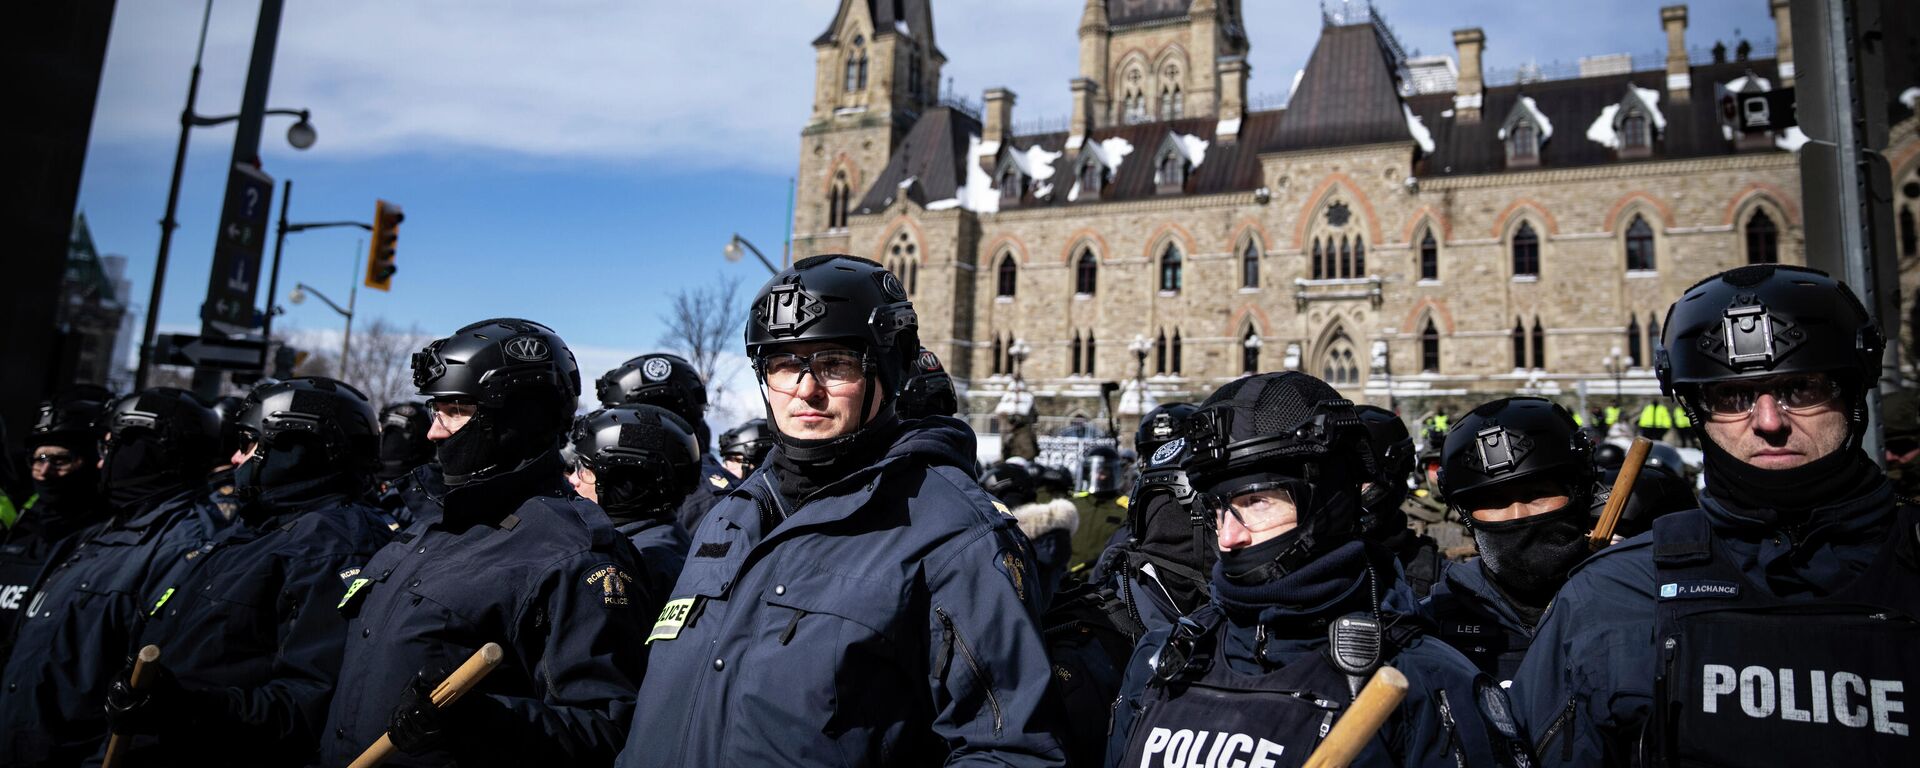 Police block protesters after taking the main street where trucks are parked in Ottawa near Parliament hill  on Saturday, Feb. 19, 2022.  Police resumed pushing back protesters on Saturday after arresting more than 100 and towing away vehicles in Canada’s besieged capital, and scores of trucks left under the pressure, raising authorities’ hopes for an end to the three-week protest against the country’s COVID-19 restrictions.  (AP Photo/Robert Bumsted) - Sputnik International, 1920, 20.02.2022